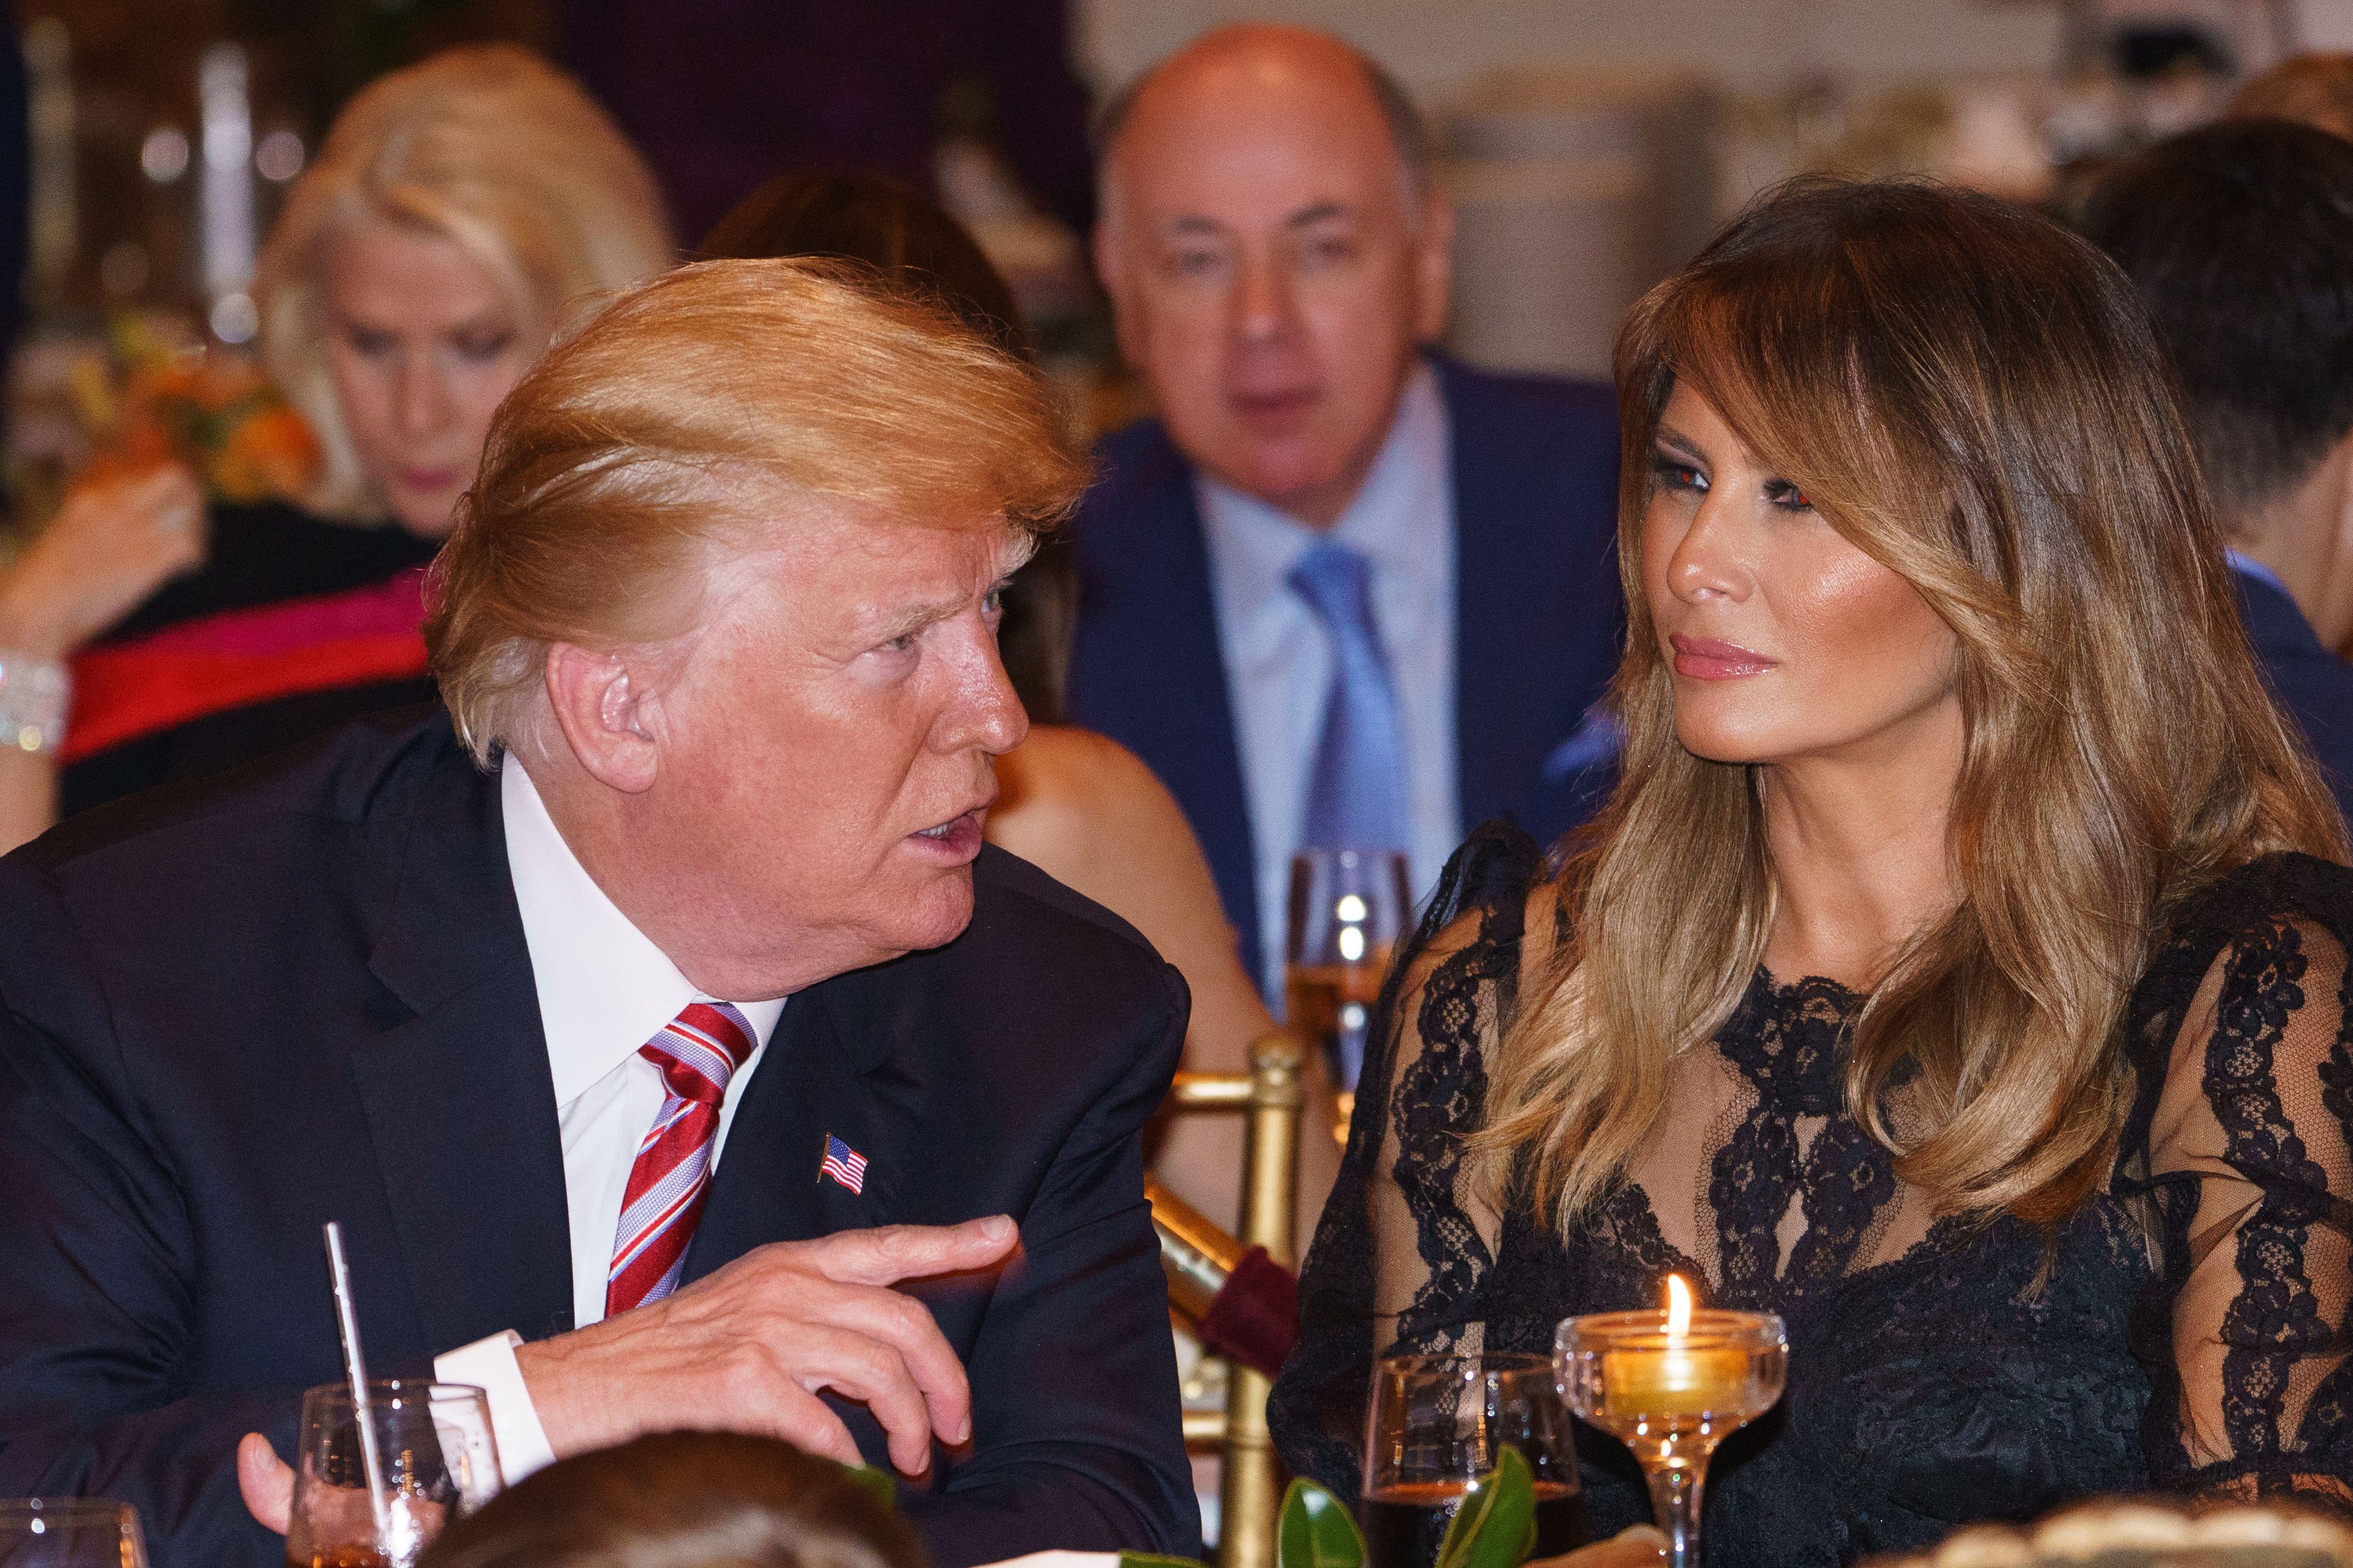 Donald Trump and Melania Trump seated at a fancy dinner.